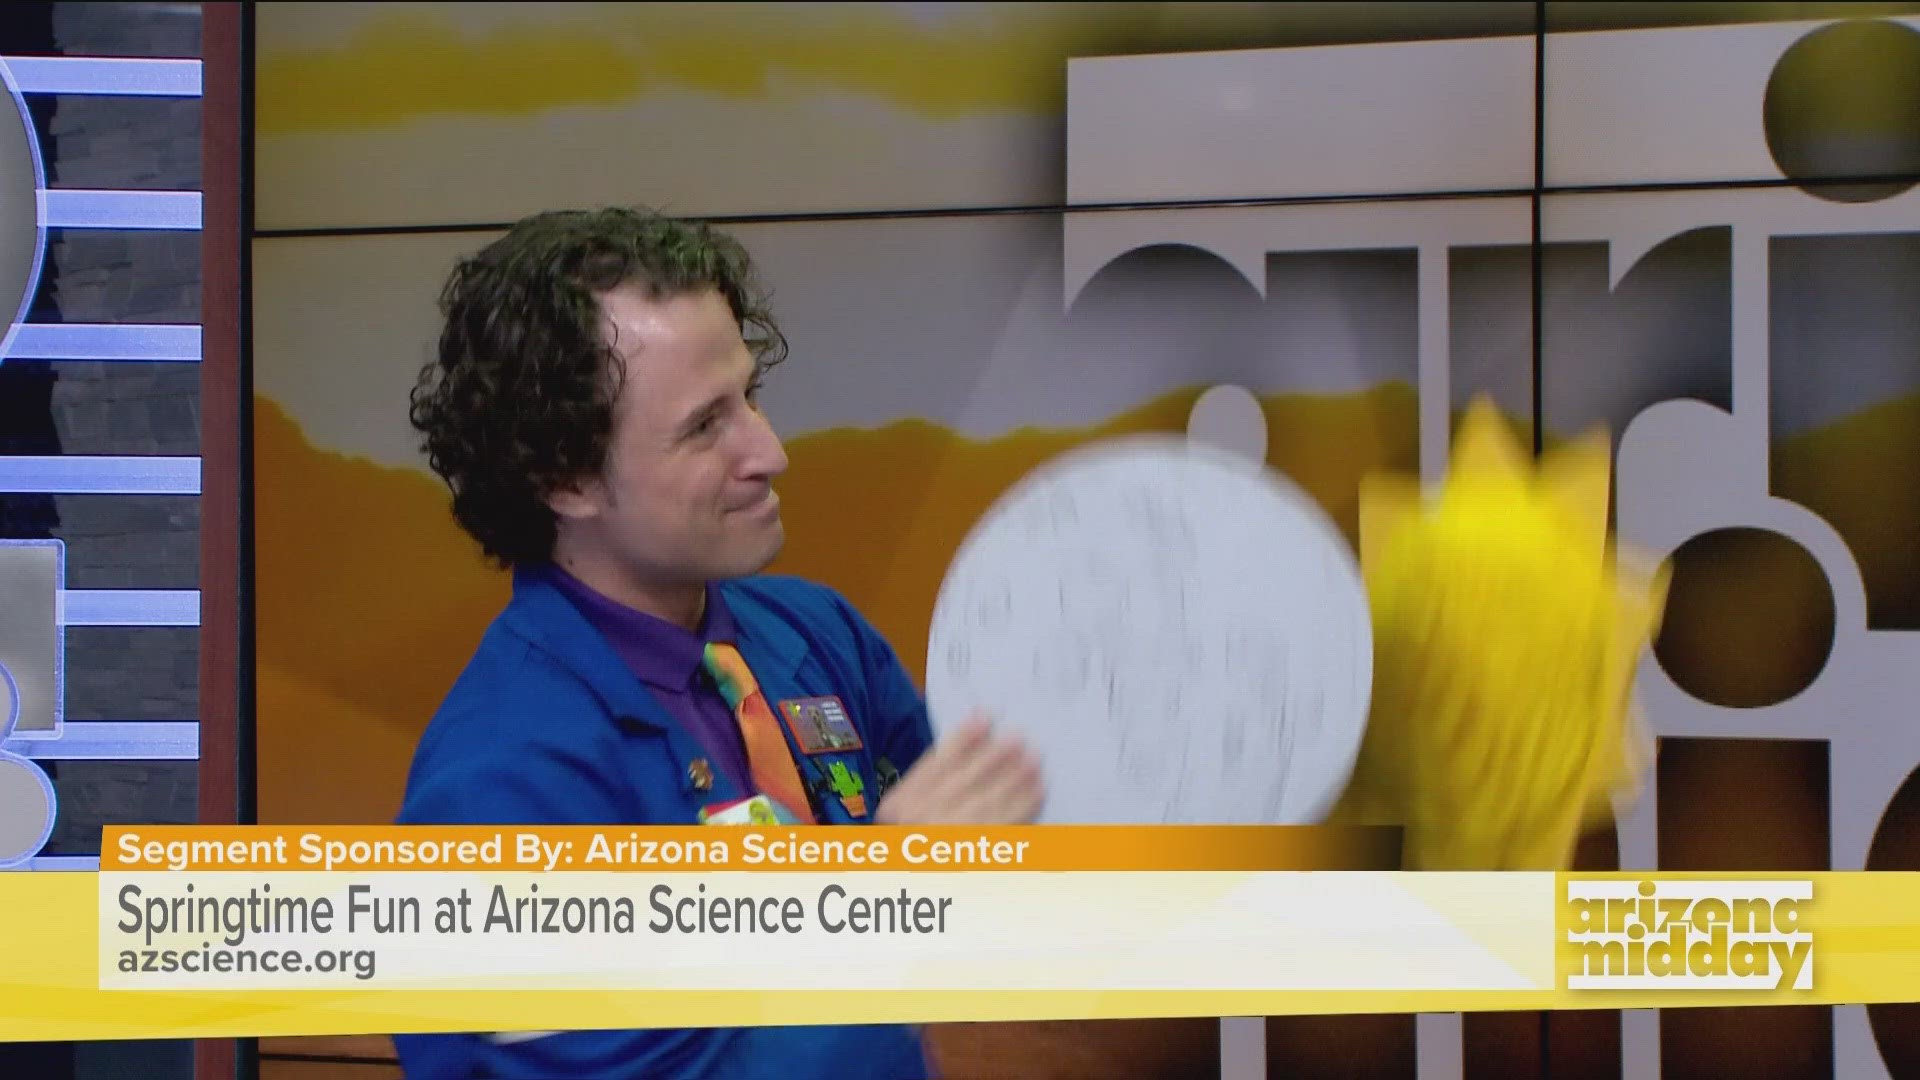 Noah Brown with the Arizona Science Center shows us what happens to the moon and sun during a solar eclipse and how you can take precautions during the event.